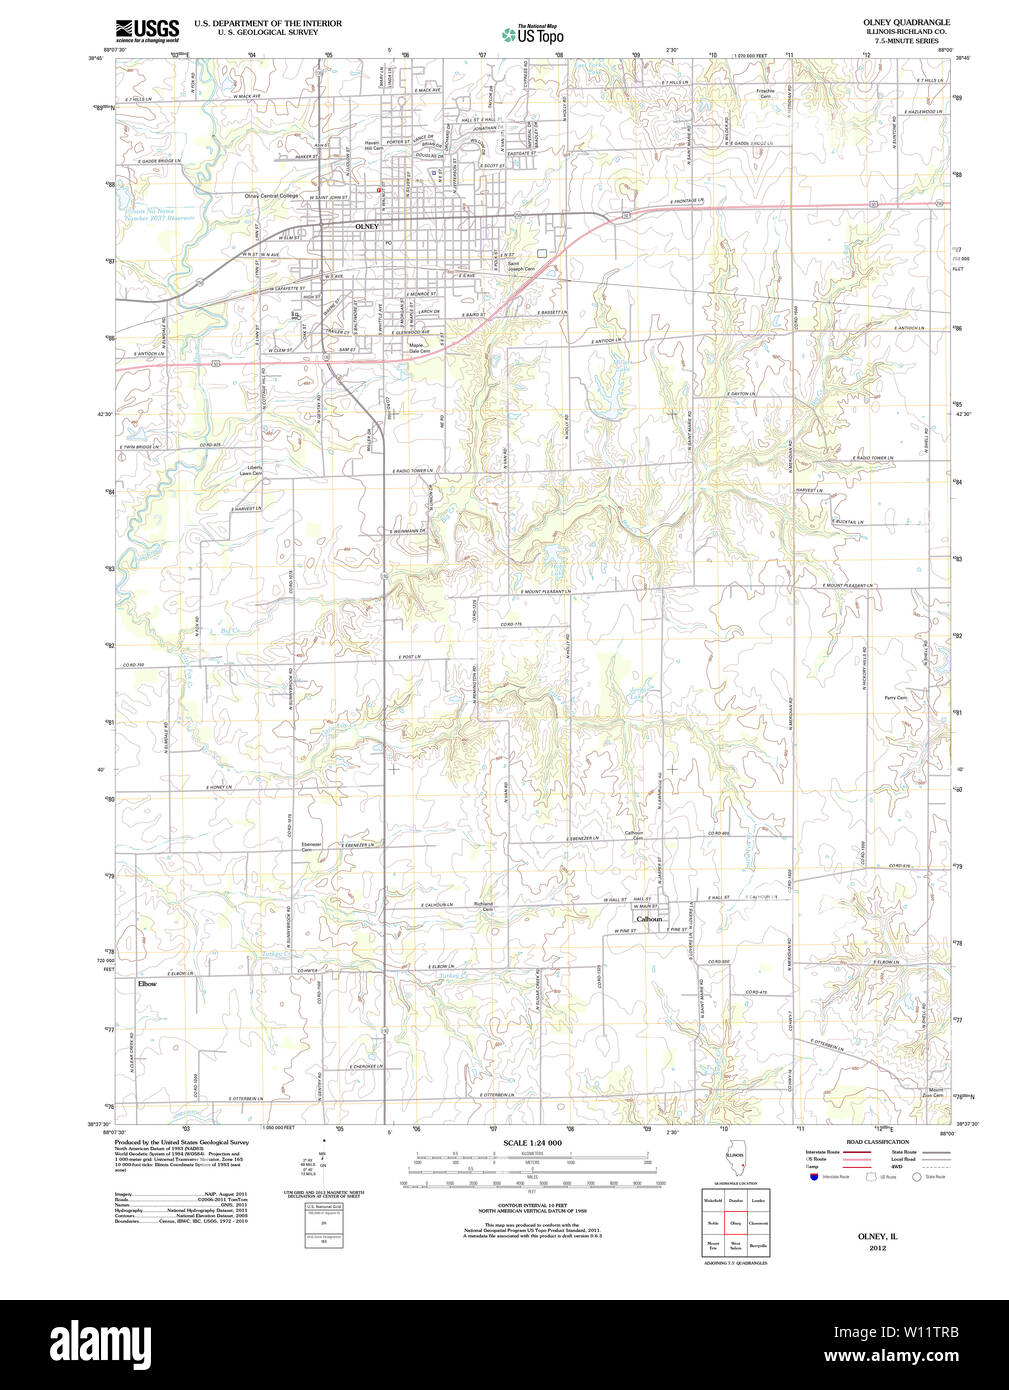 Olney illinois map Cut Out Stock Images & Pictures - Alamy